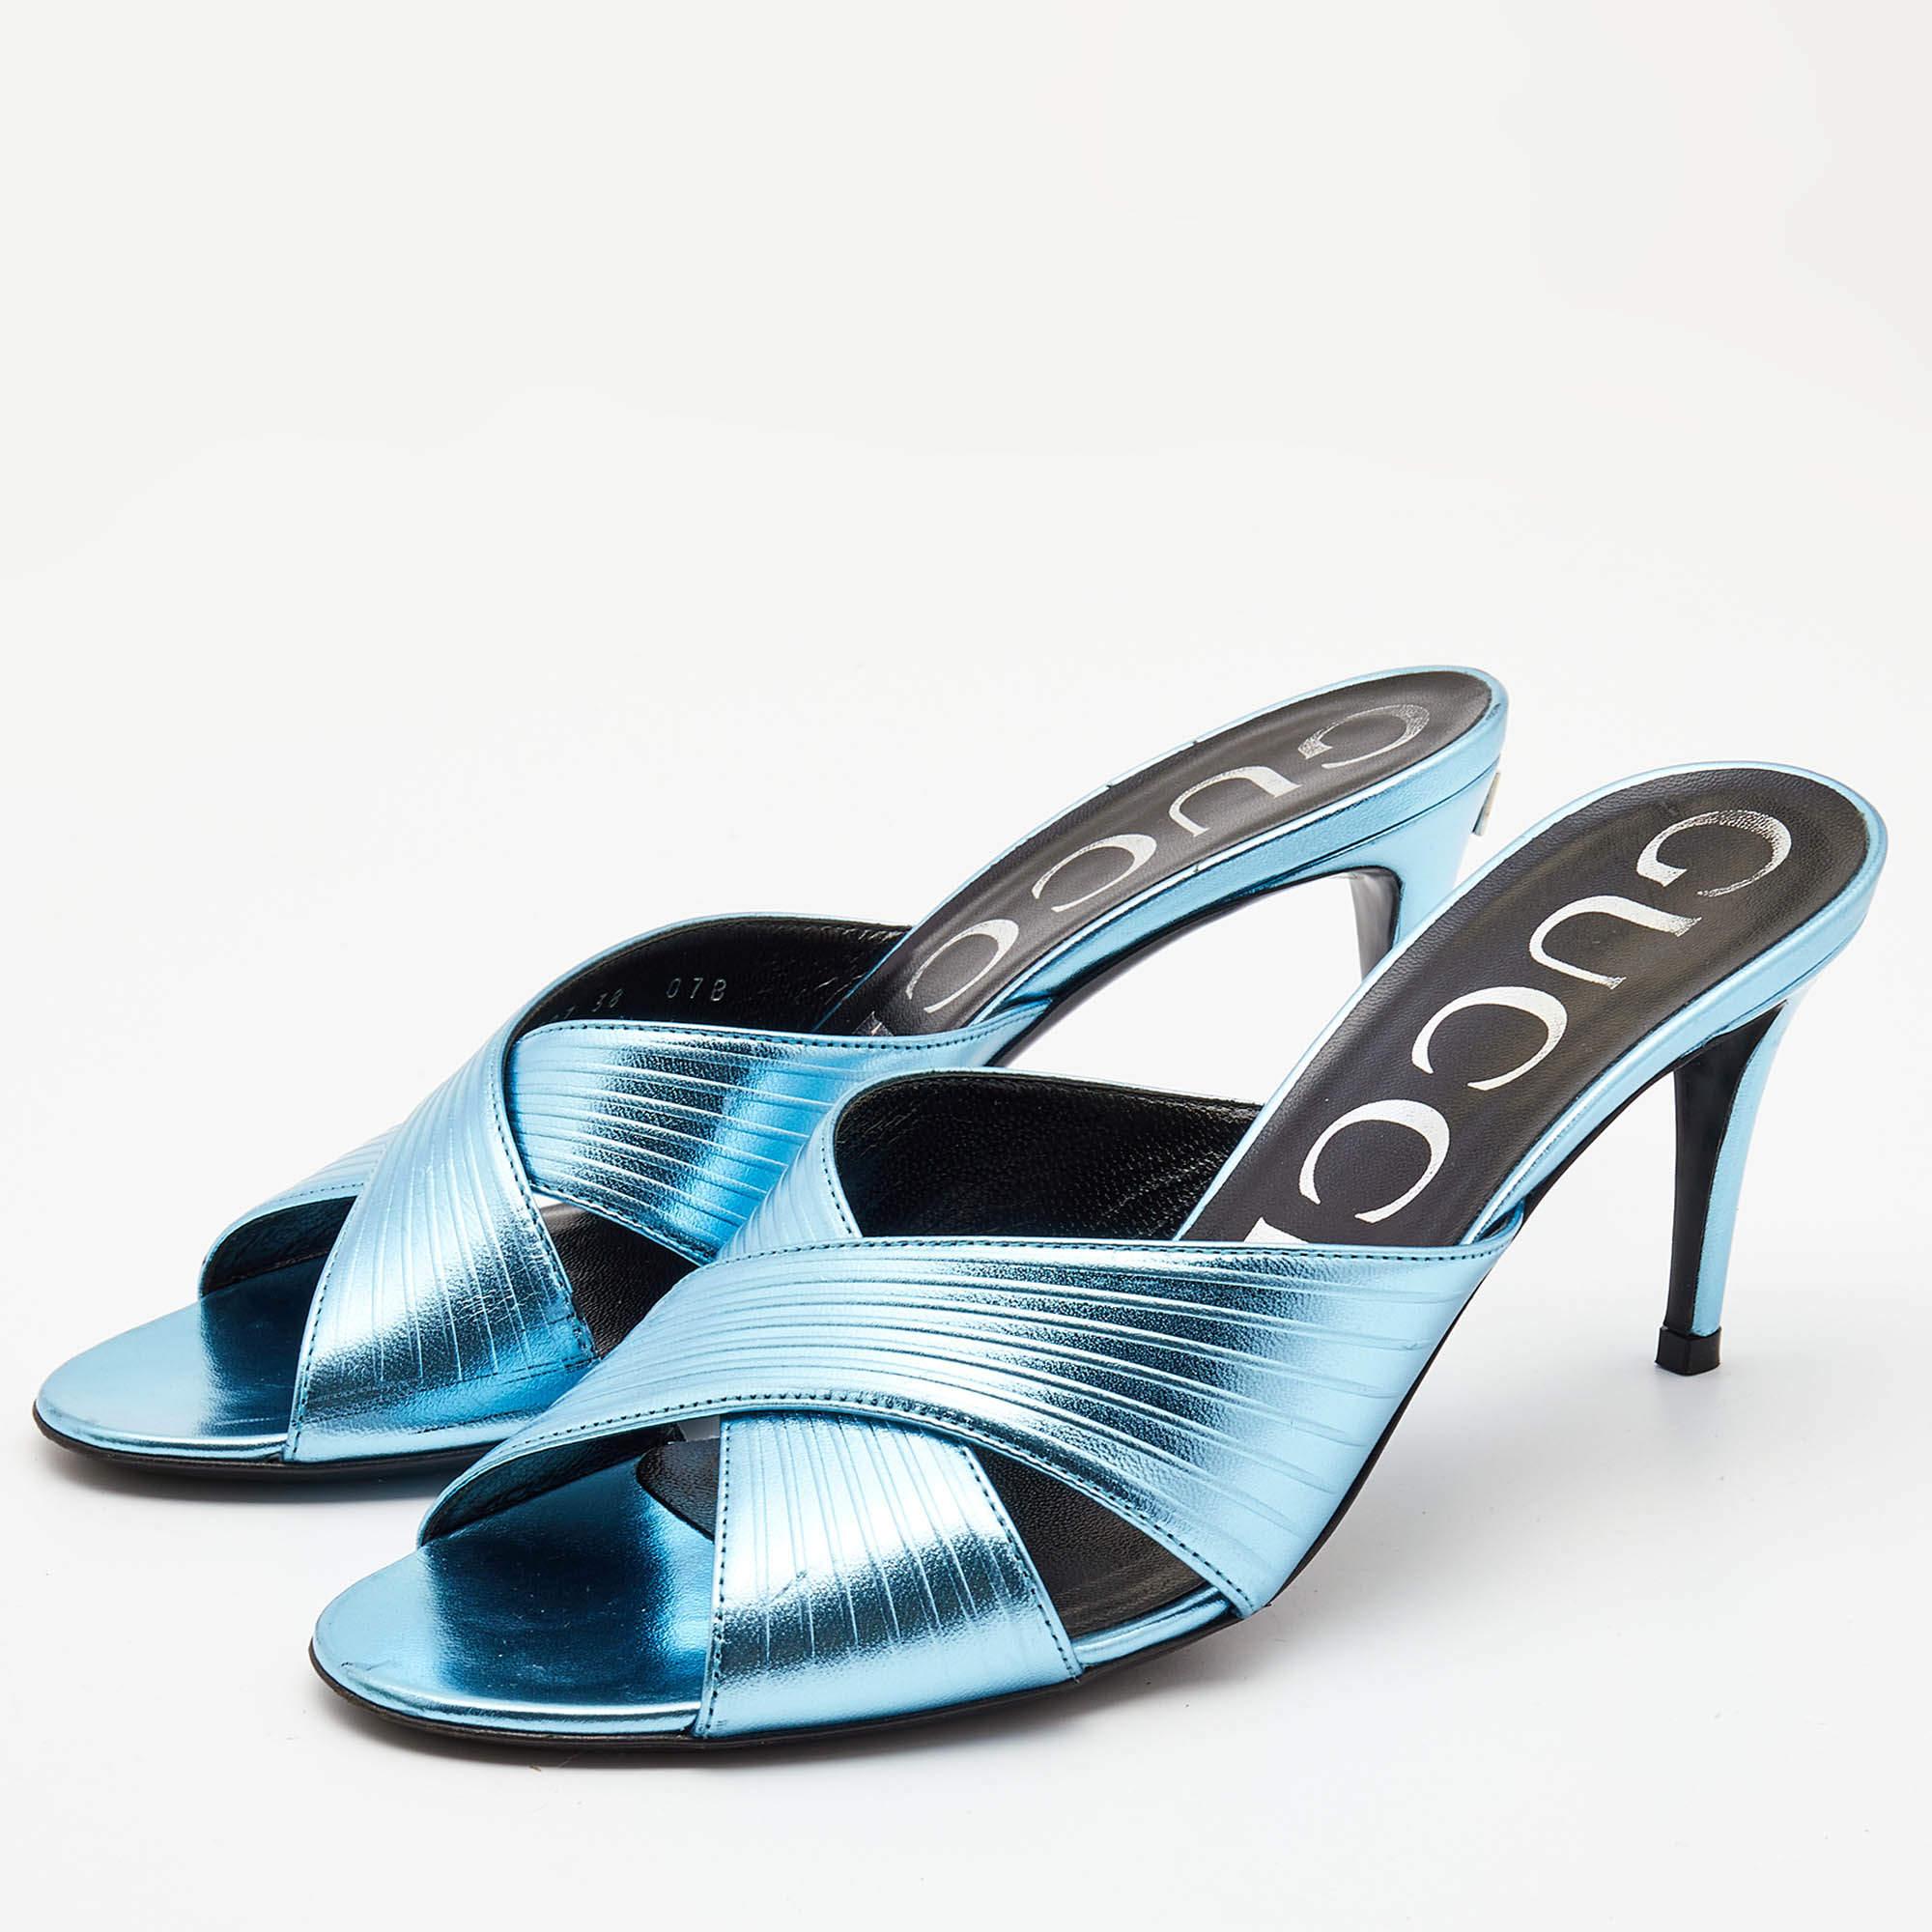 Charm your way to all your social gatherings in this pair of slide sandals from Gucci. Crafted from metallic leather, they carry a feminine design with criss-cross straps and brand motif on the back.

